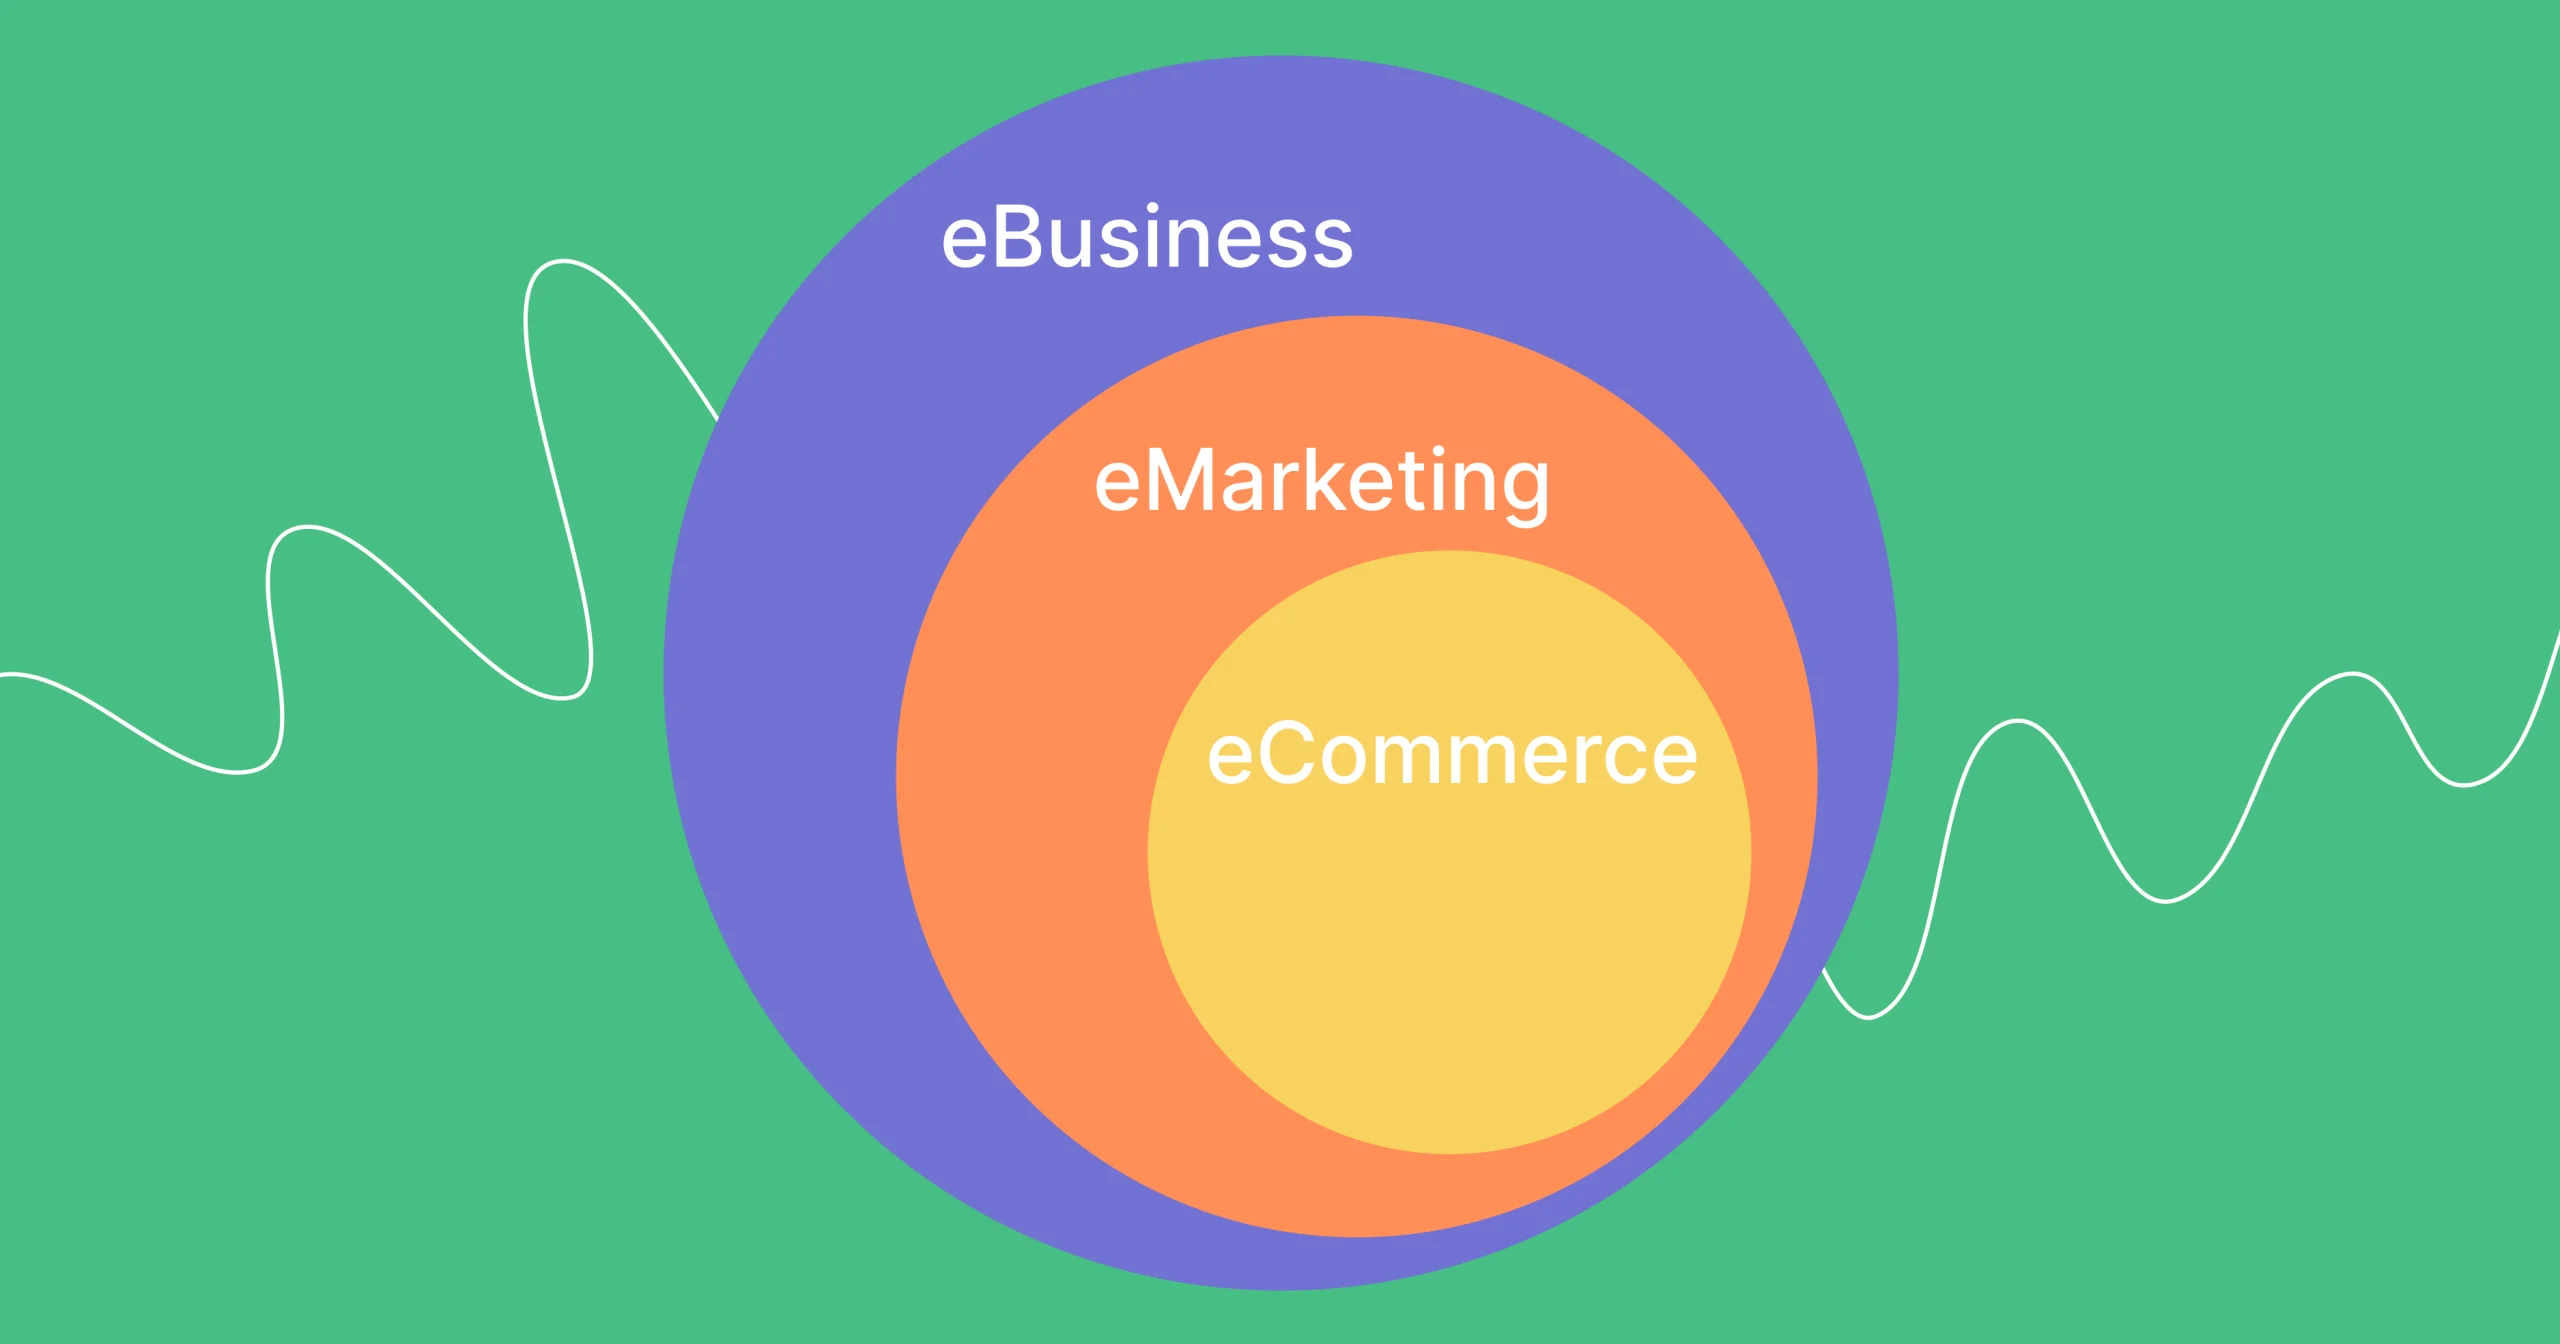 Relations between e-commerce, e-marketing and e-bussiness